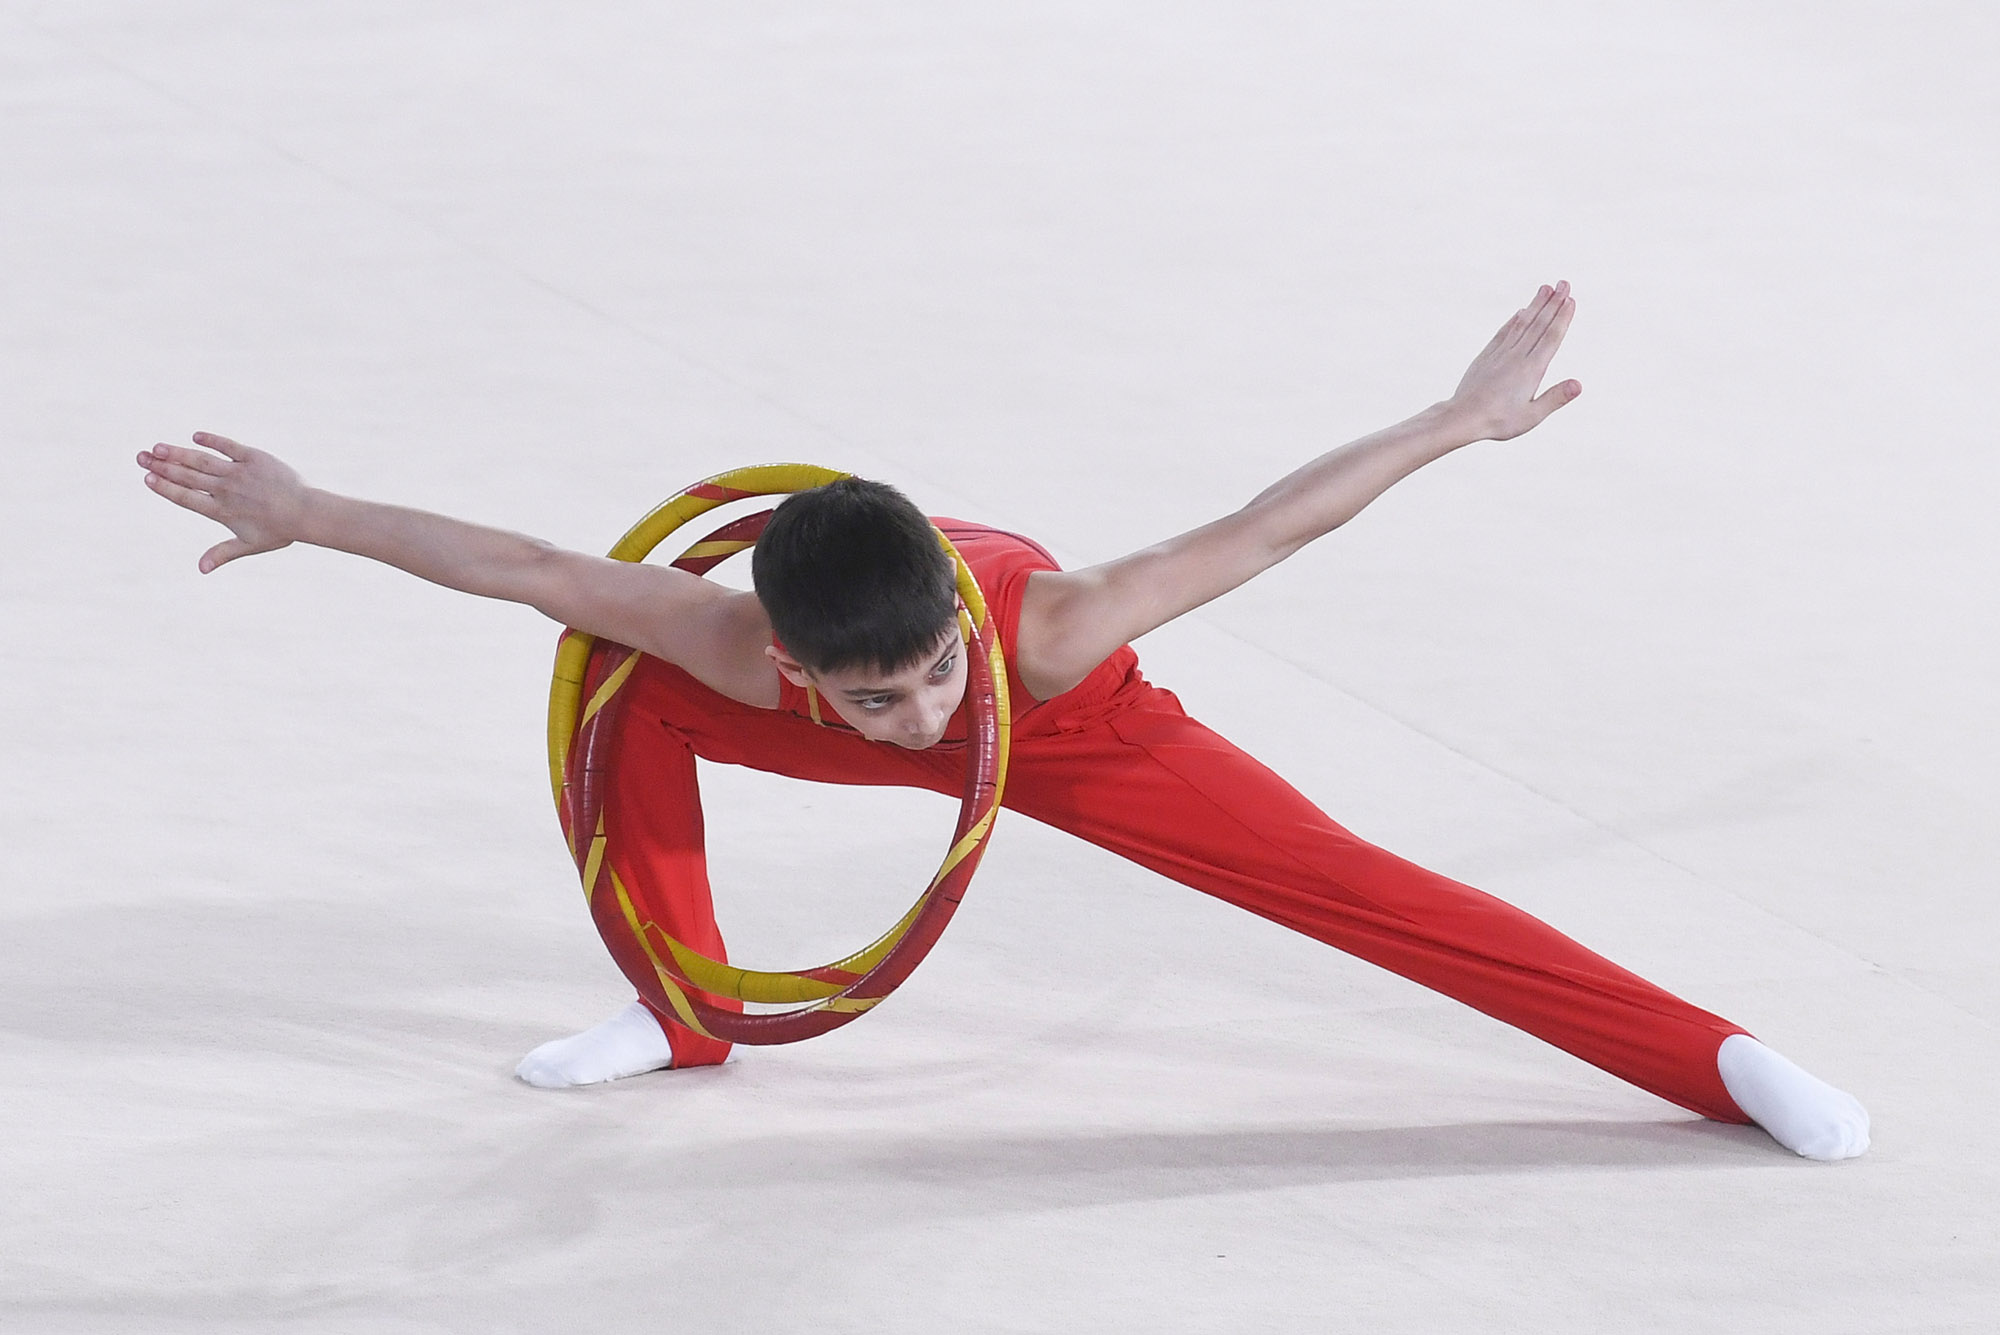 Left Out of Olympics, Men's Rhythmic Gymnasts Loved in Japan - Bloomberg